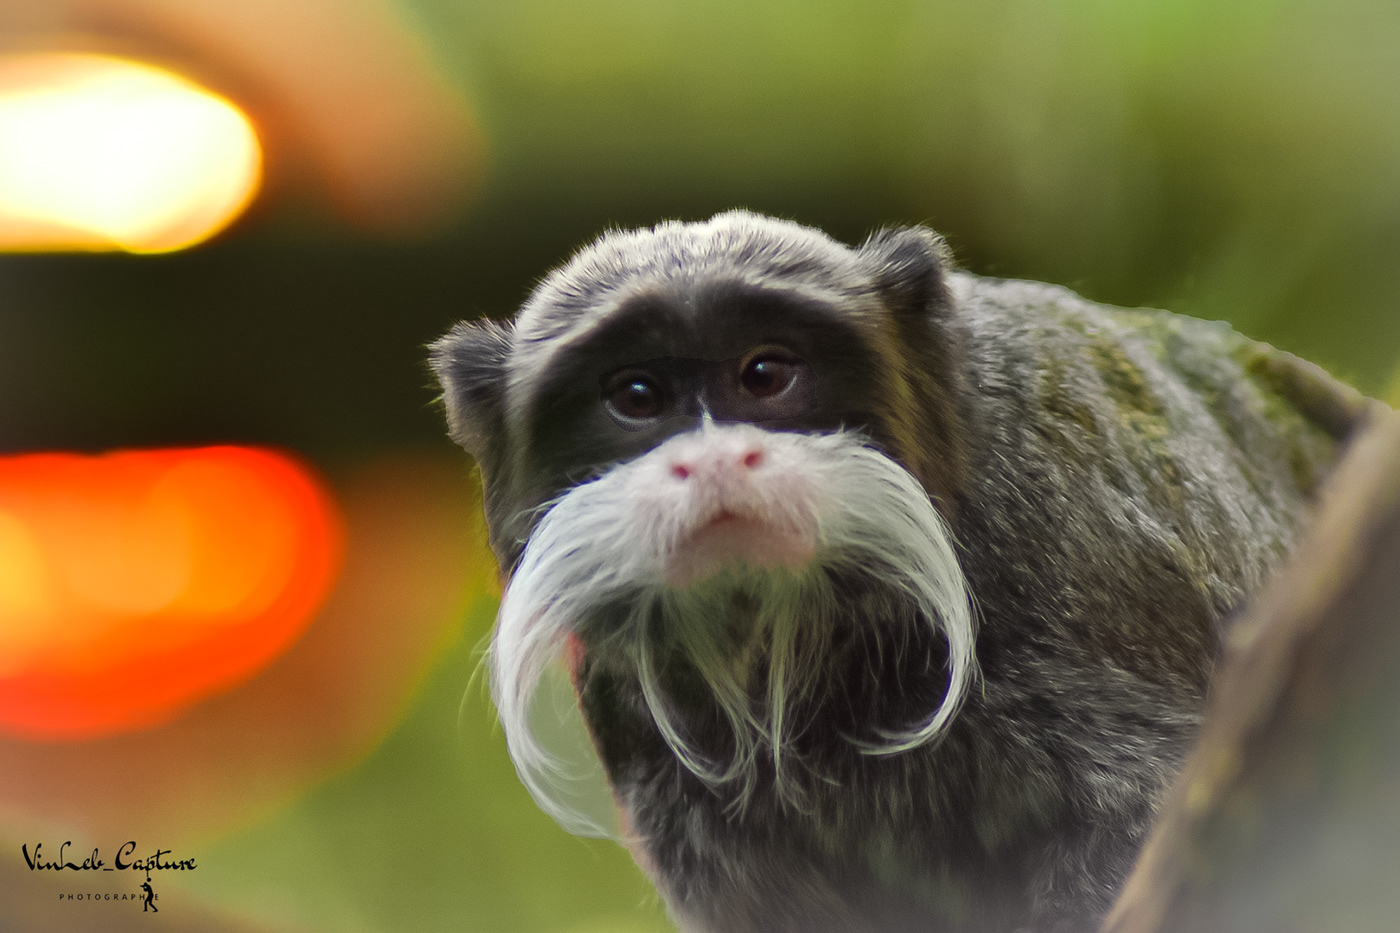 Tamarin emperor with his questioning and perplexed look